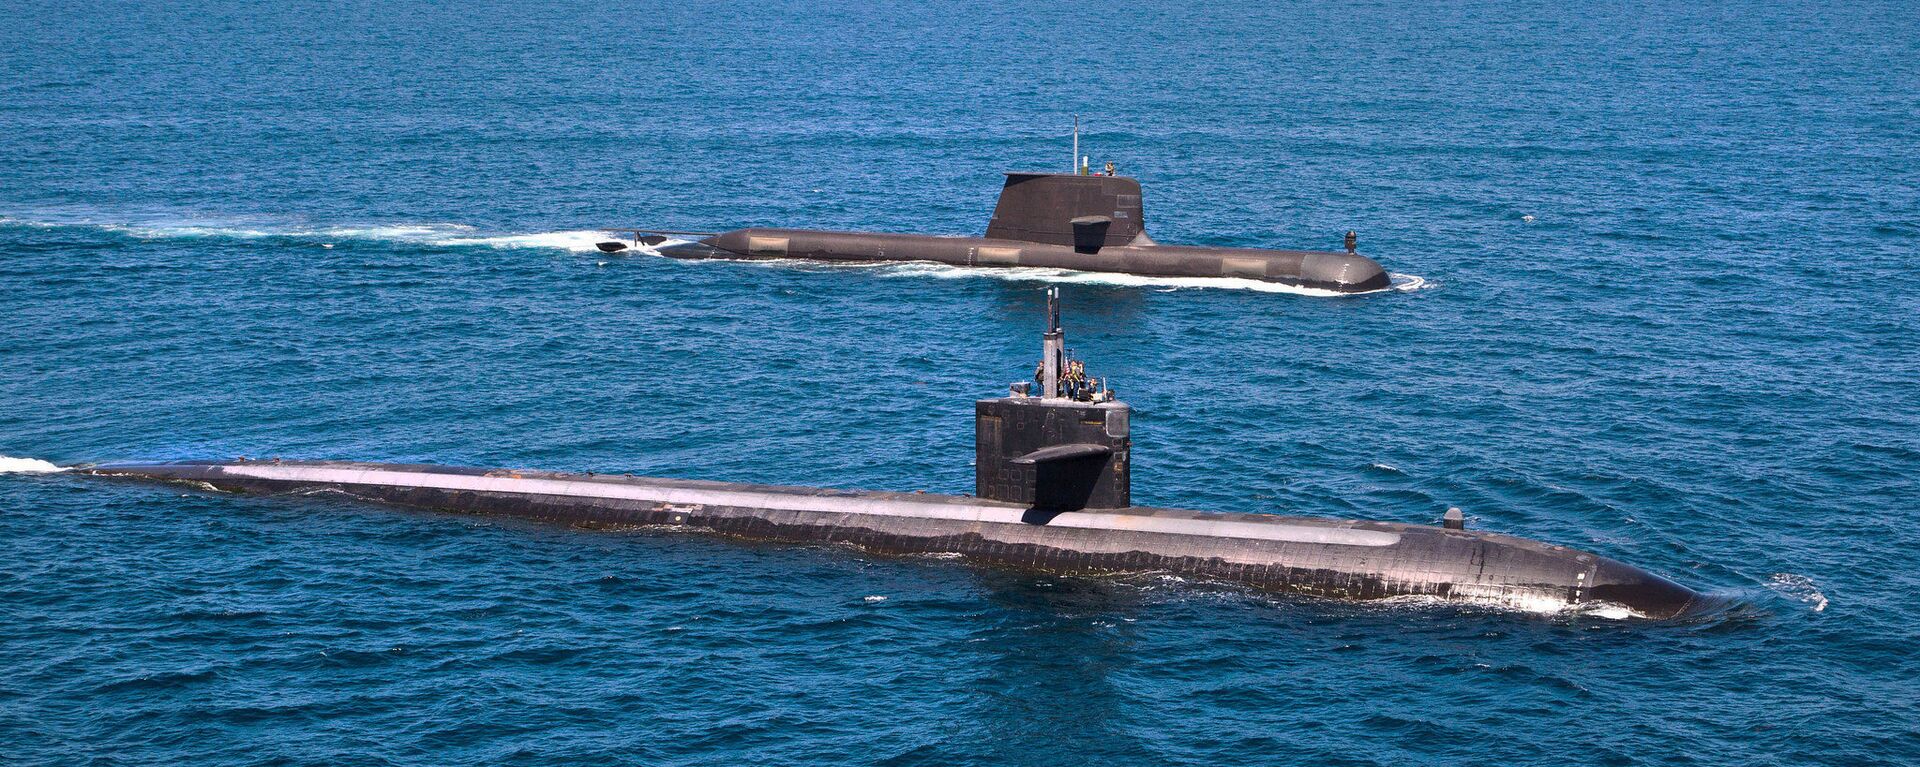 The U.S. Navy's Los Angeles-class fast attack submarine USS Albuquerque (SSN 706) and Royal Australian Navy Collins-class submarine HMAS Rankin (SSG 78) operate together in waters off Rottnest Island, Western Australia.  - Sputnik International, 1920, 20.09.2022